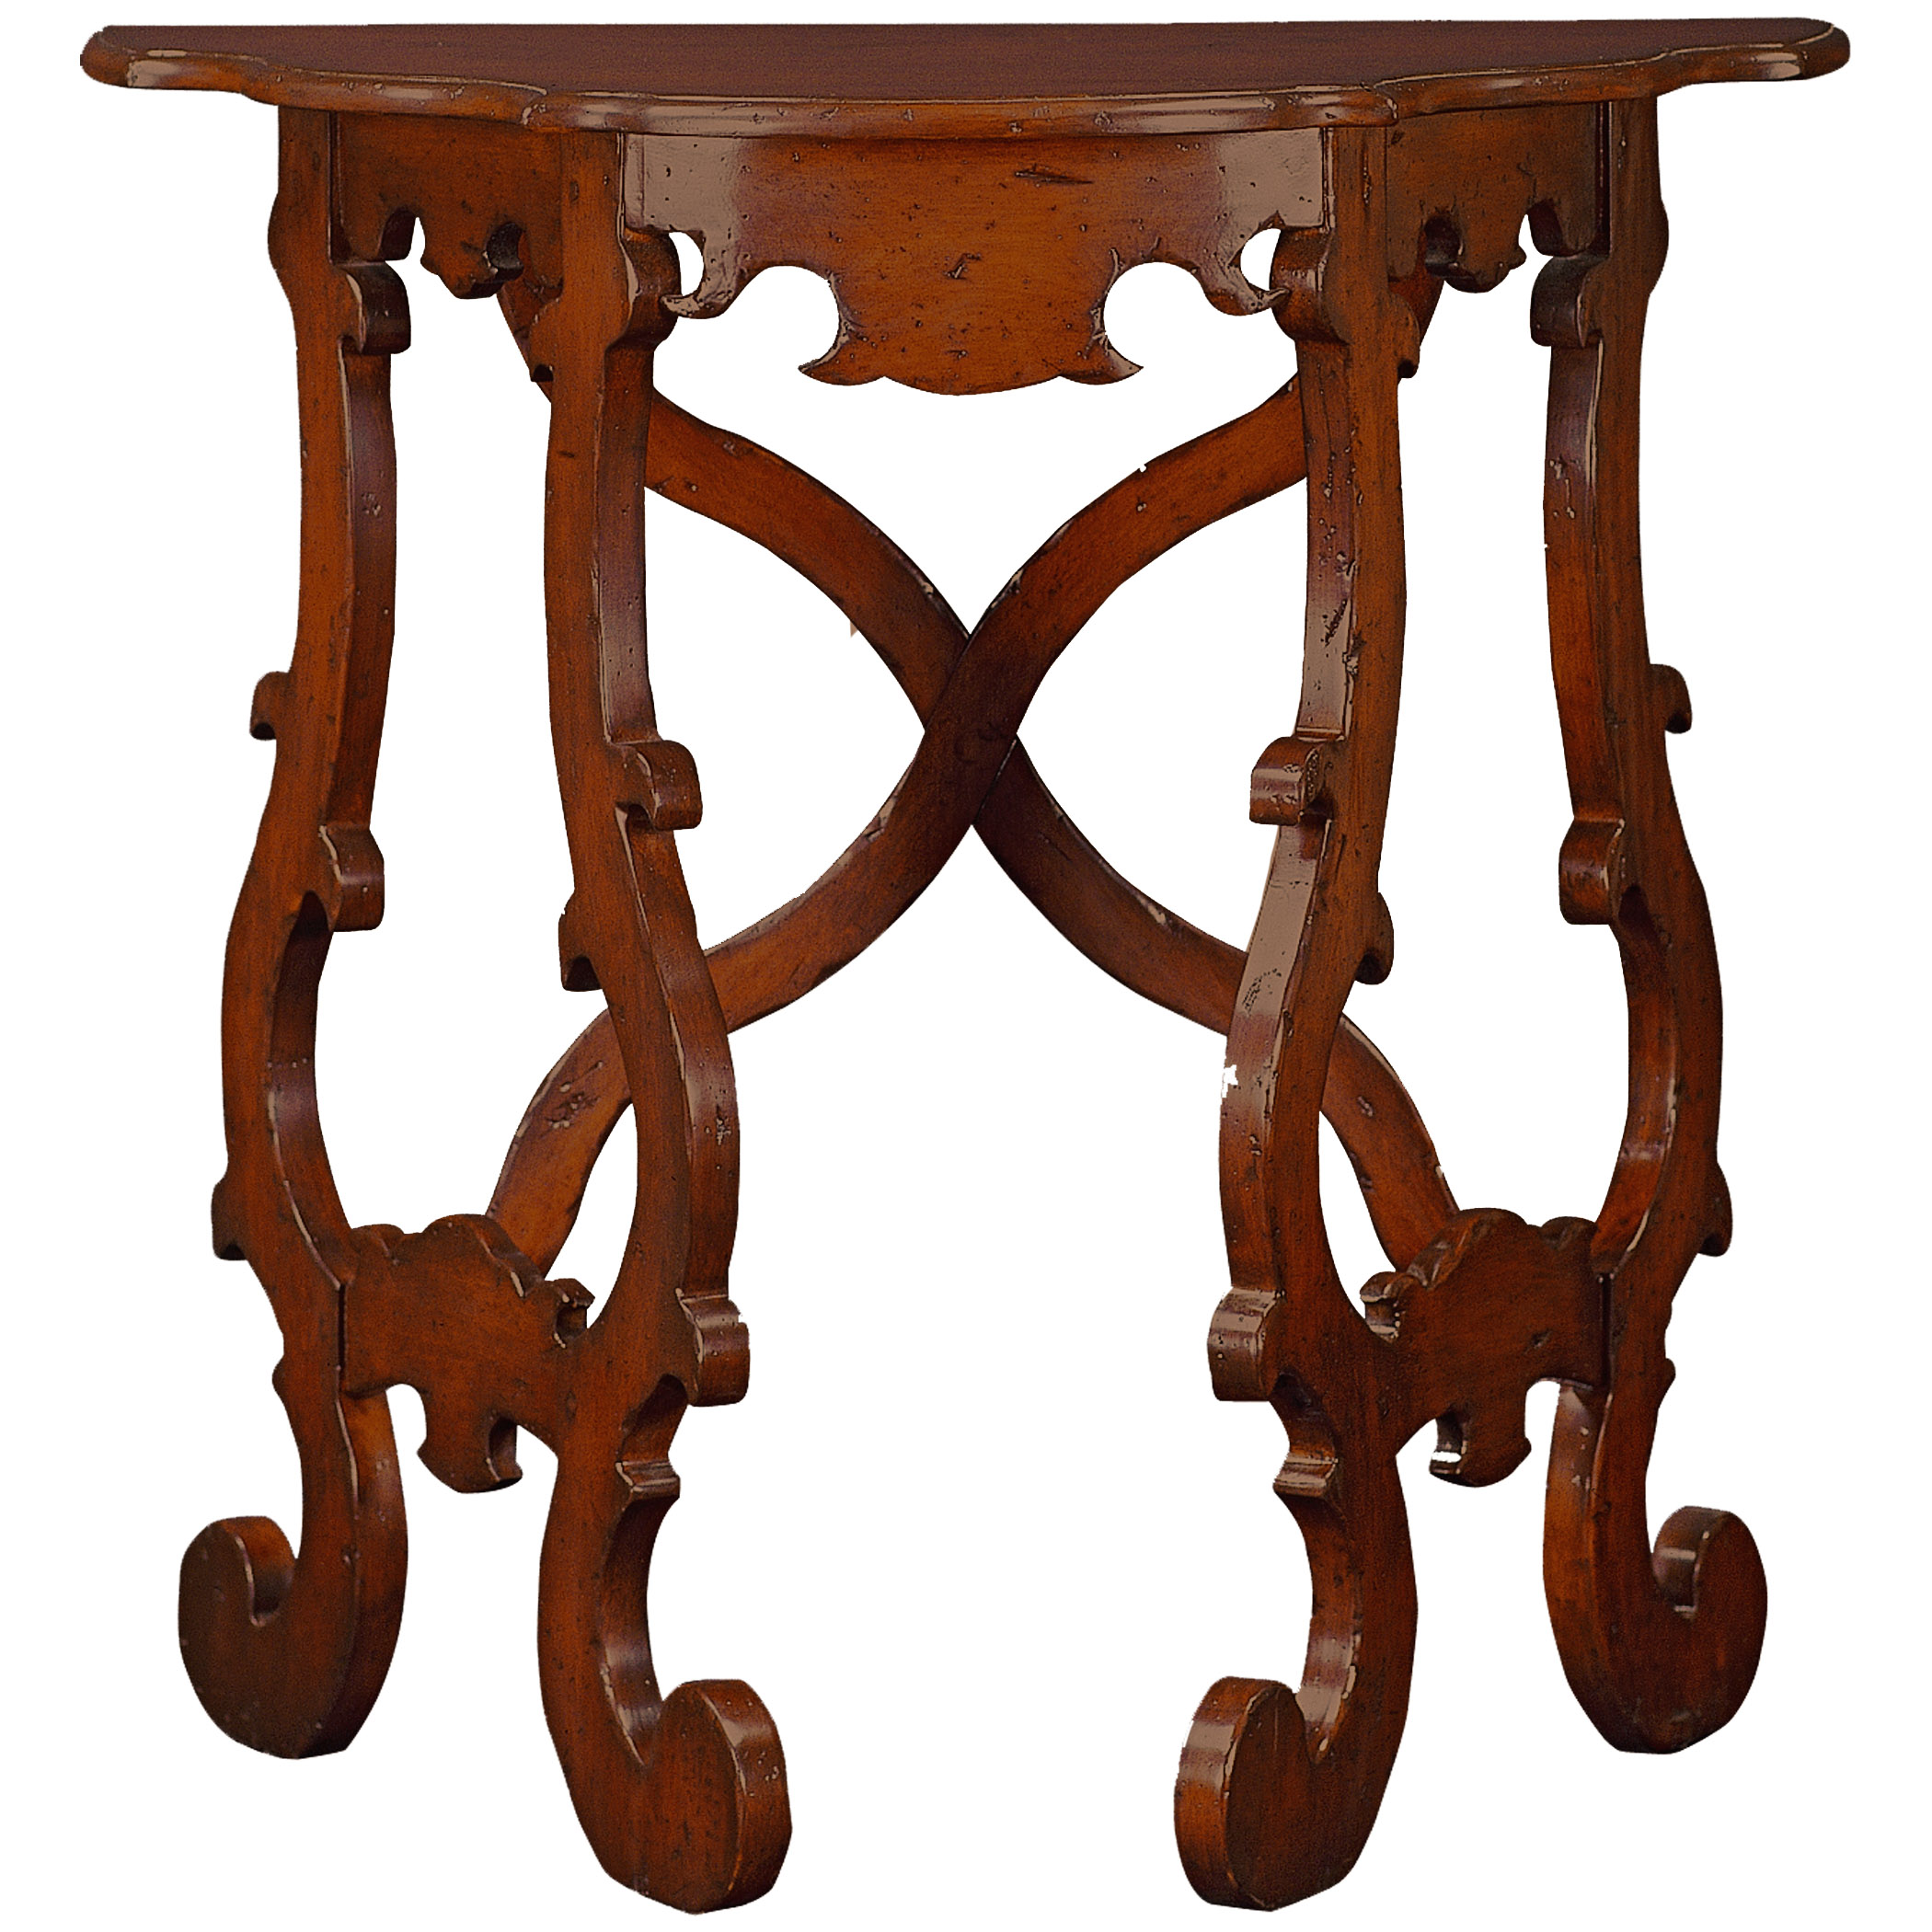 Carlotta traditional Center Table with ornate carved legs by Woodland furniture in Idaho Falls